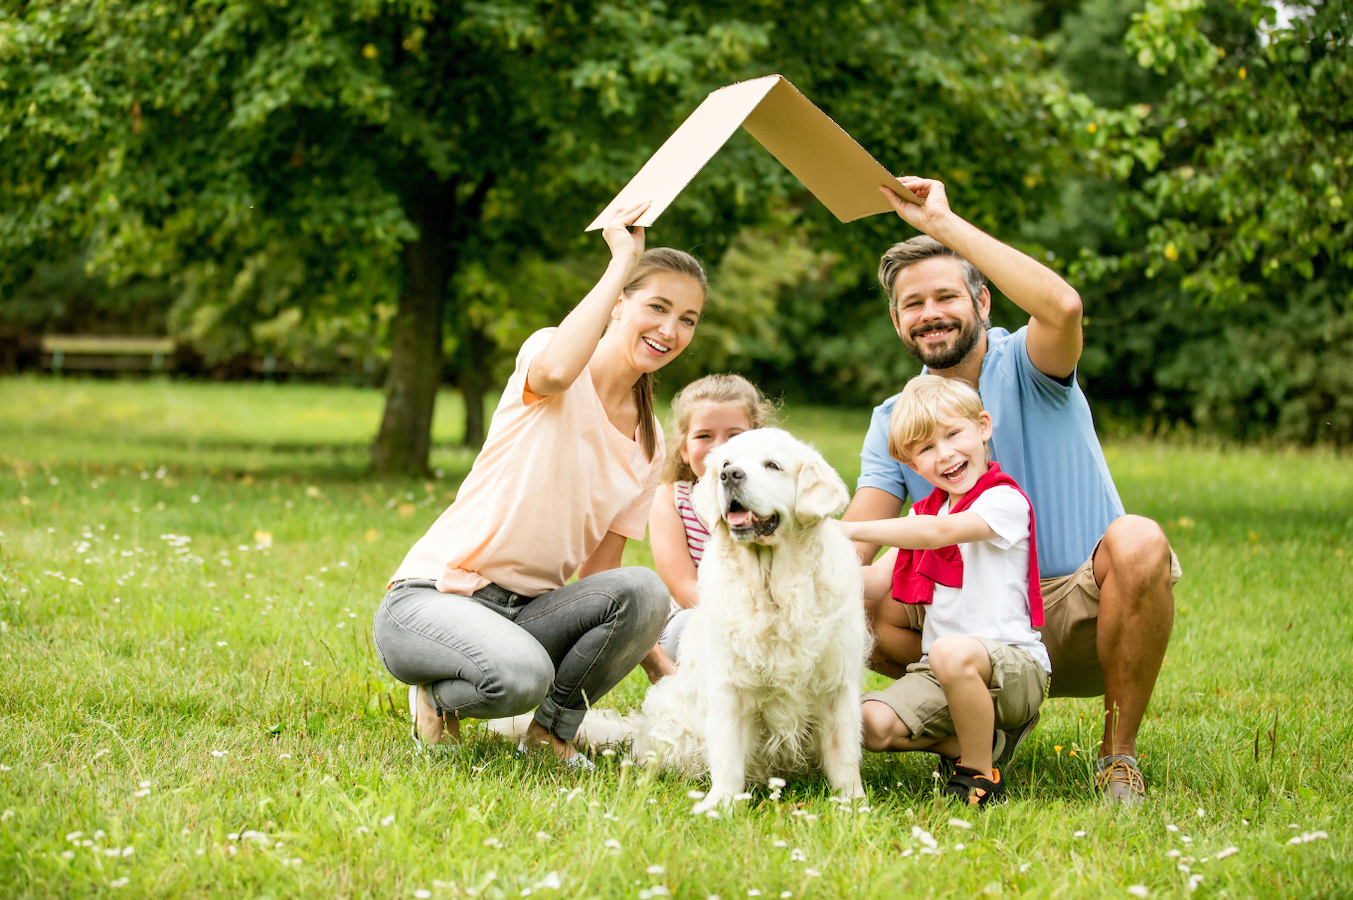 A happy family with two small children and their white Retriever in the park.